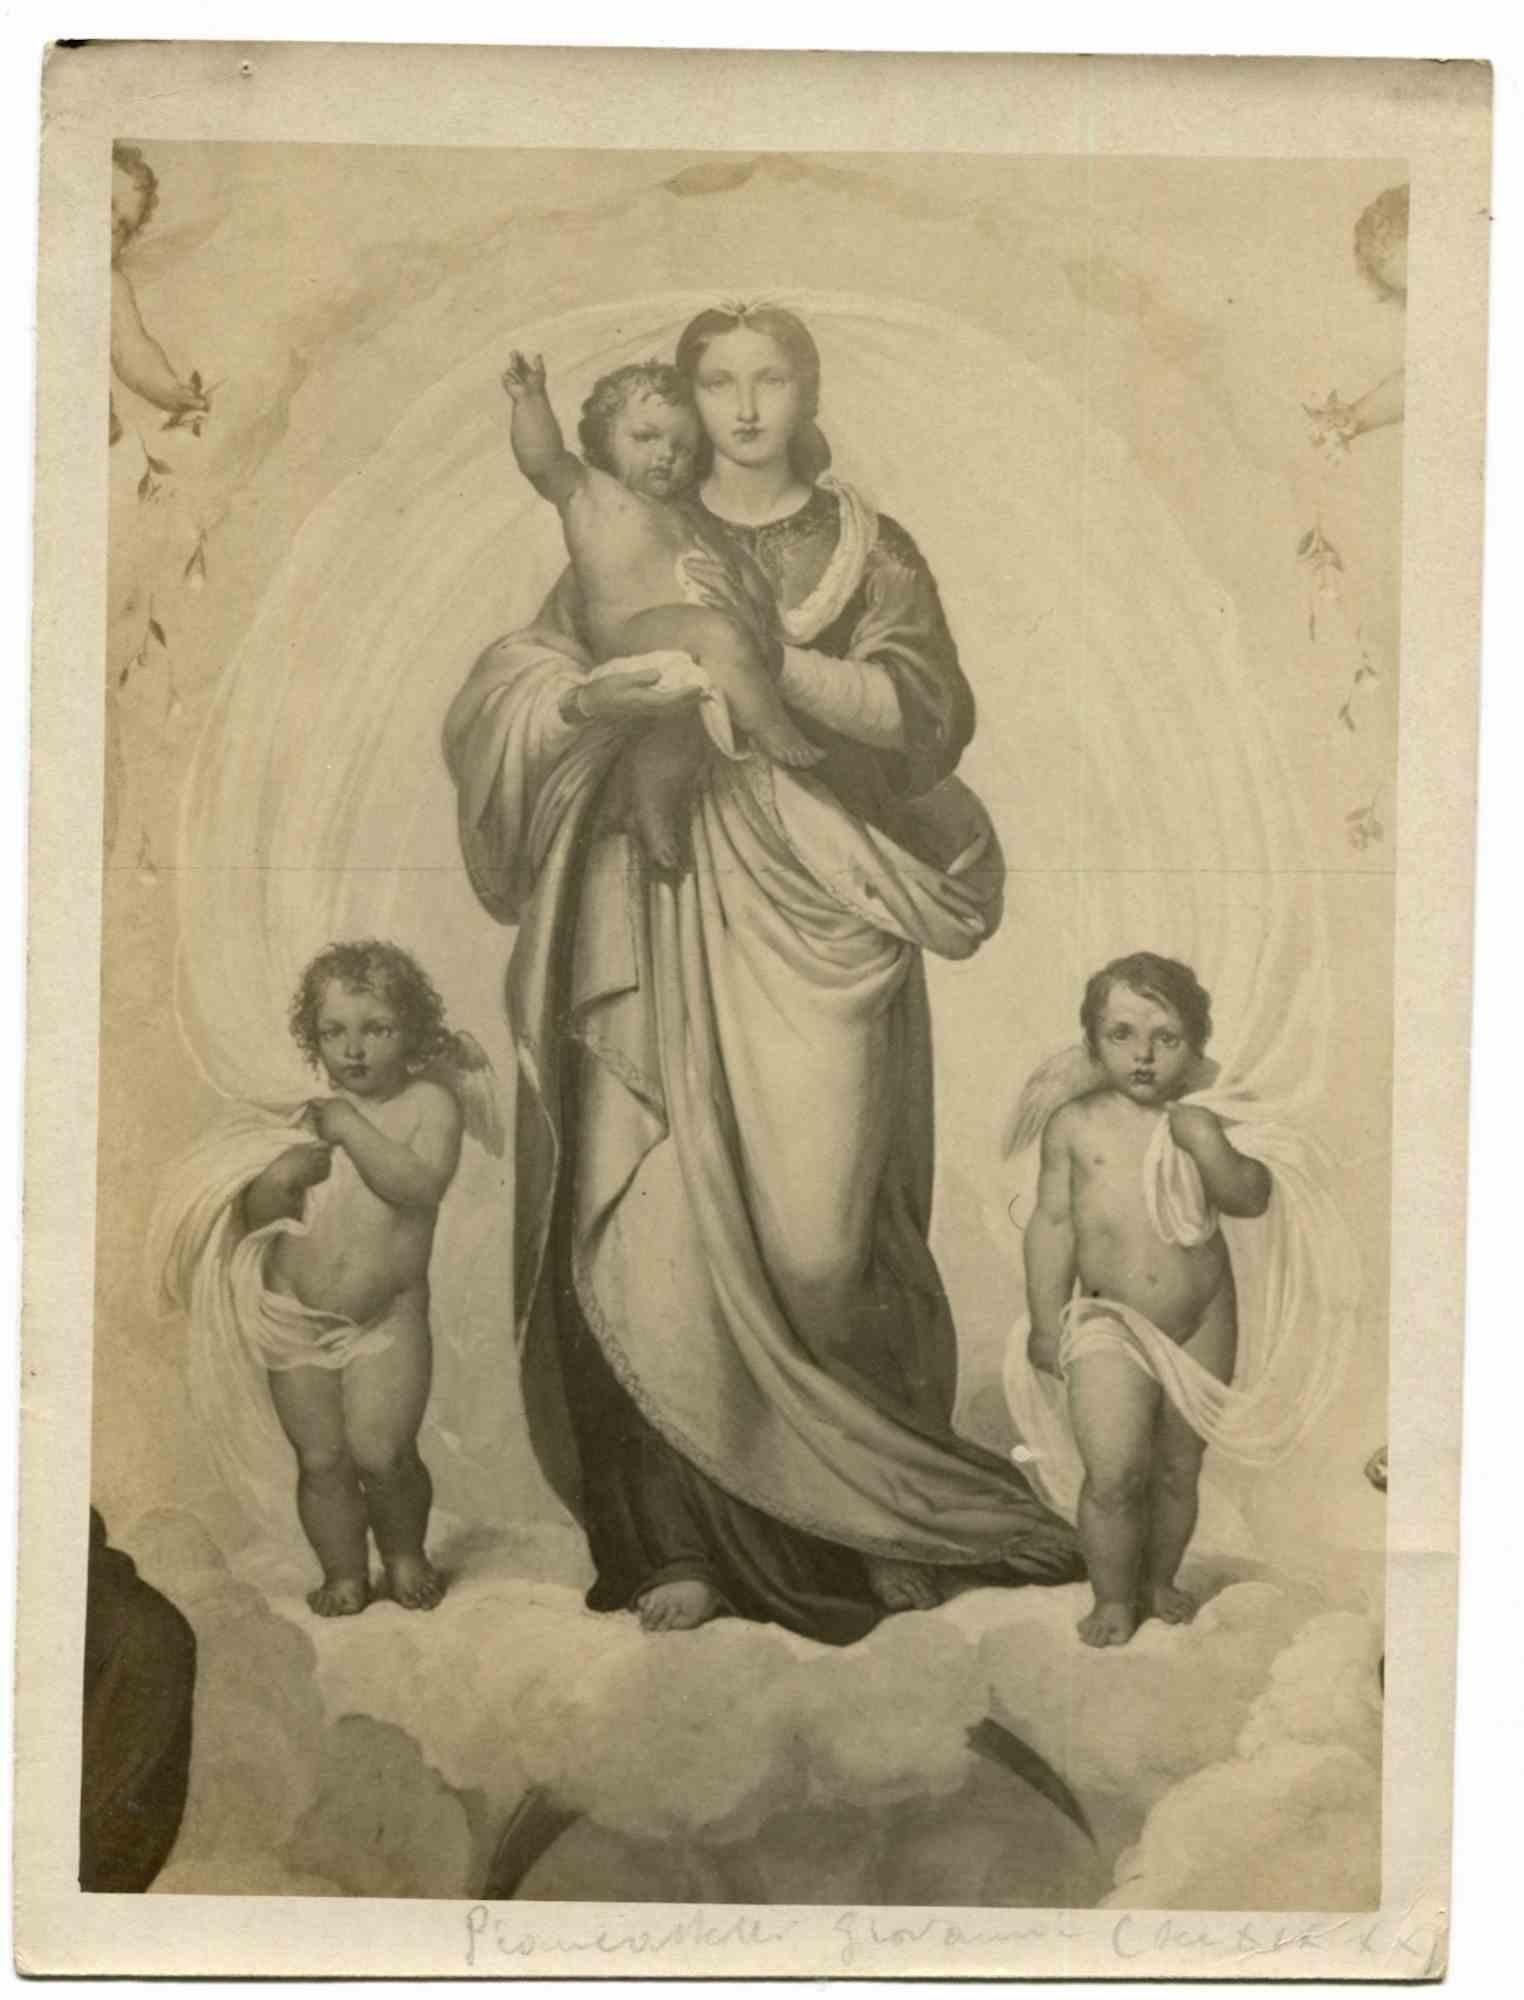 Unknown Black and White Photograph - Madonna and Child (Photo of a Painting) - Early 20th Century